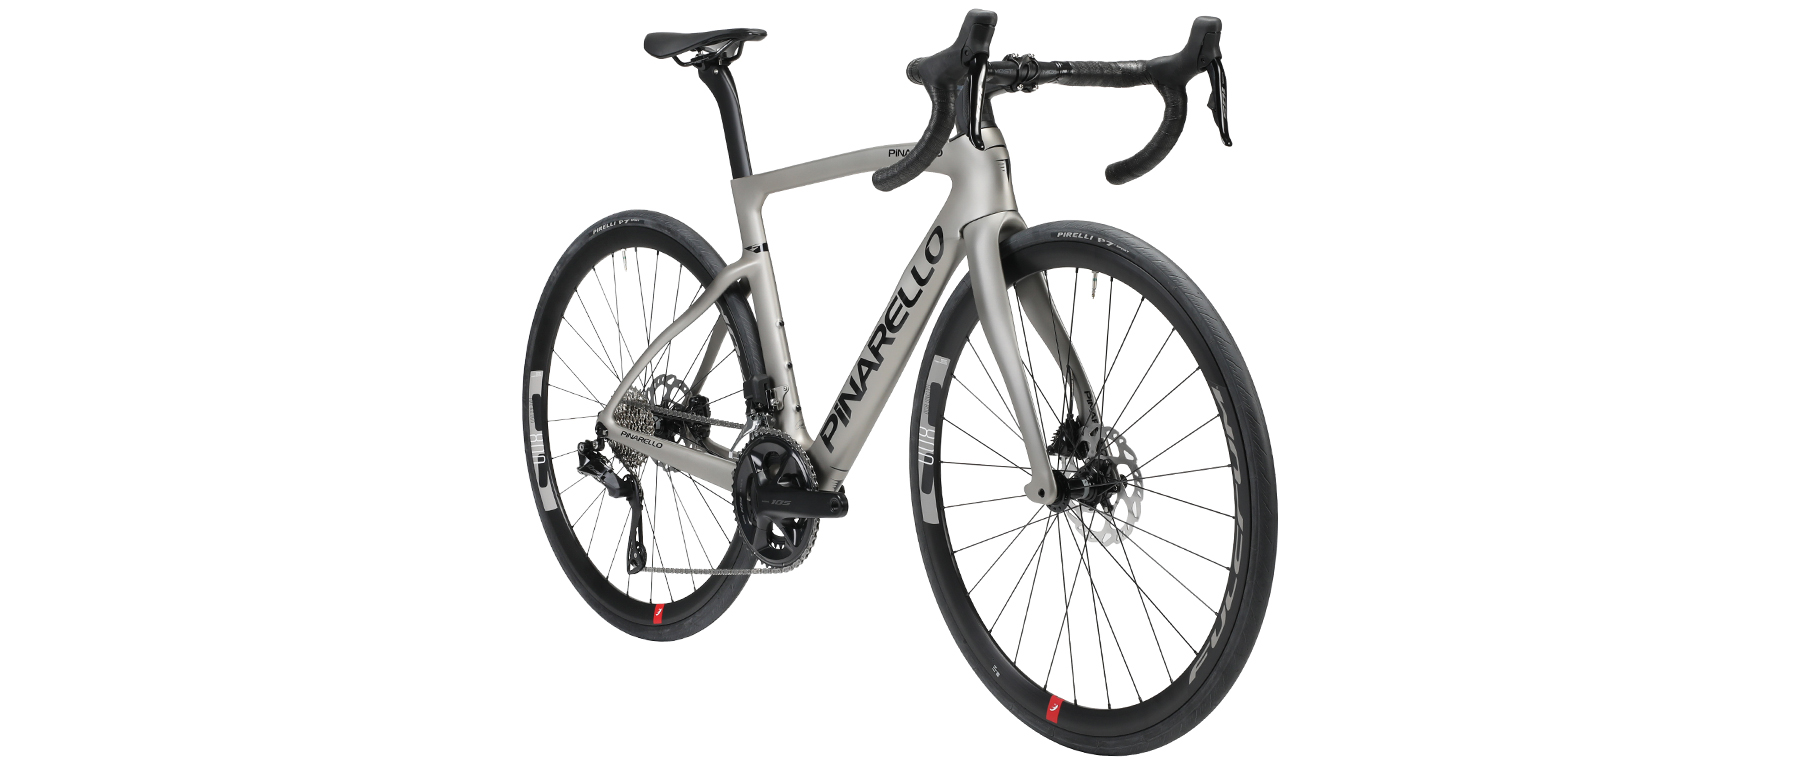 Pinarello F5 105 Di2 R7170 Bicycle (with Alloy Wheelset)